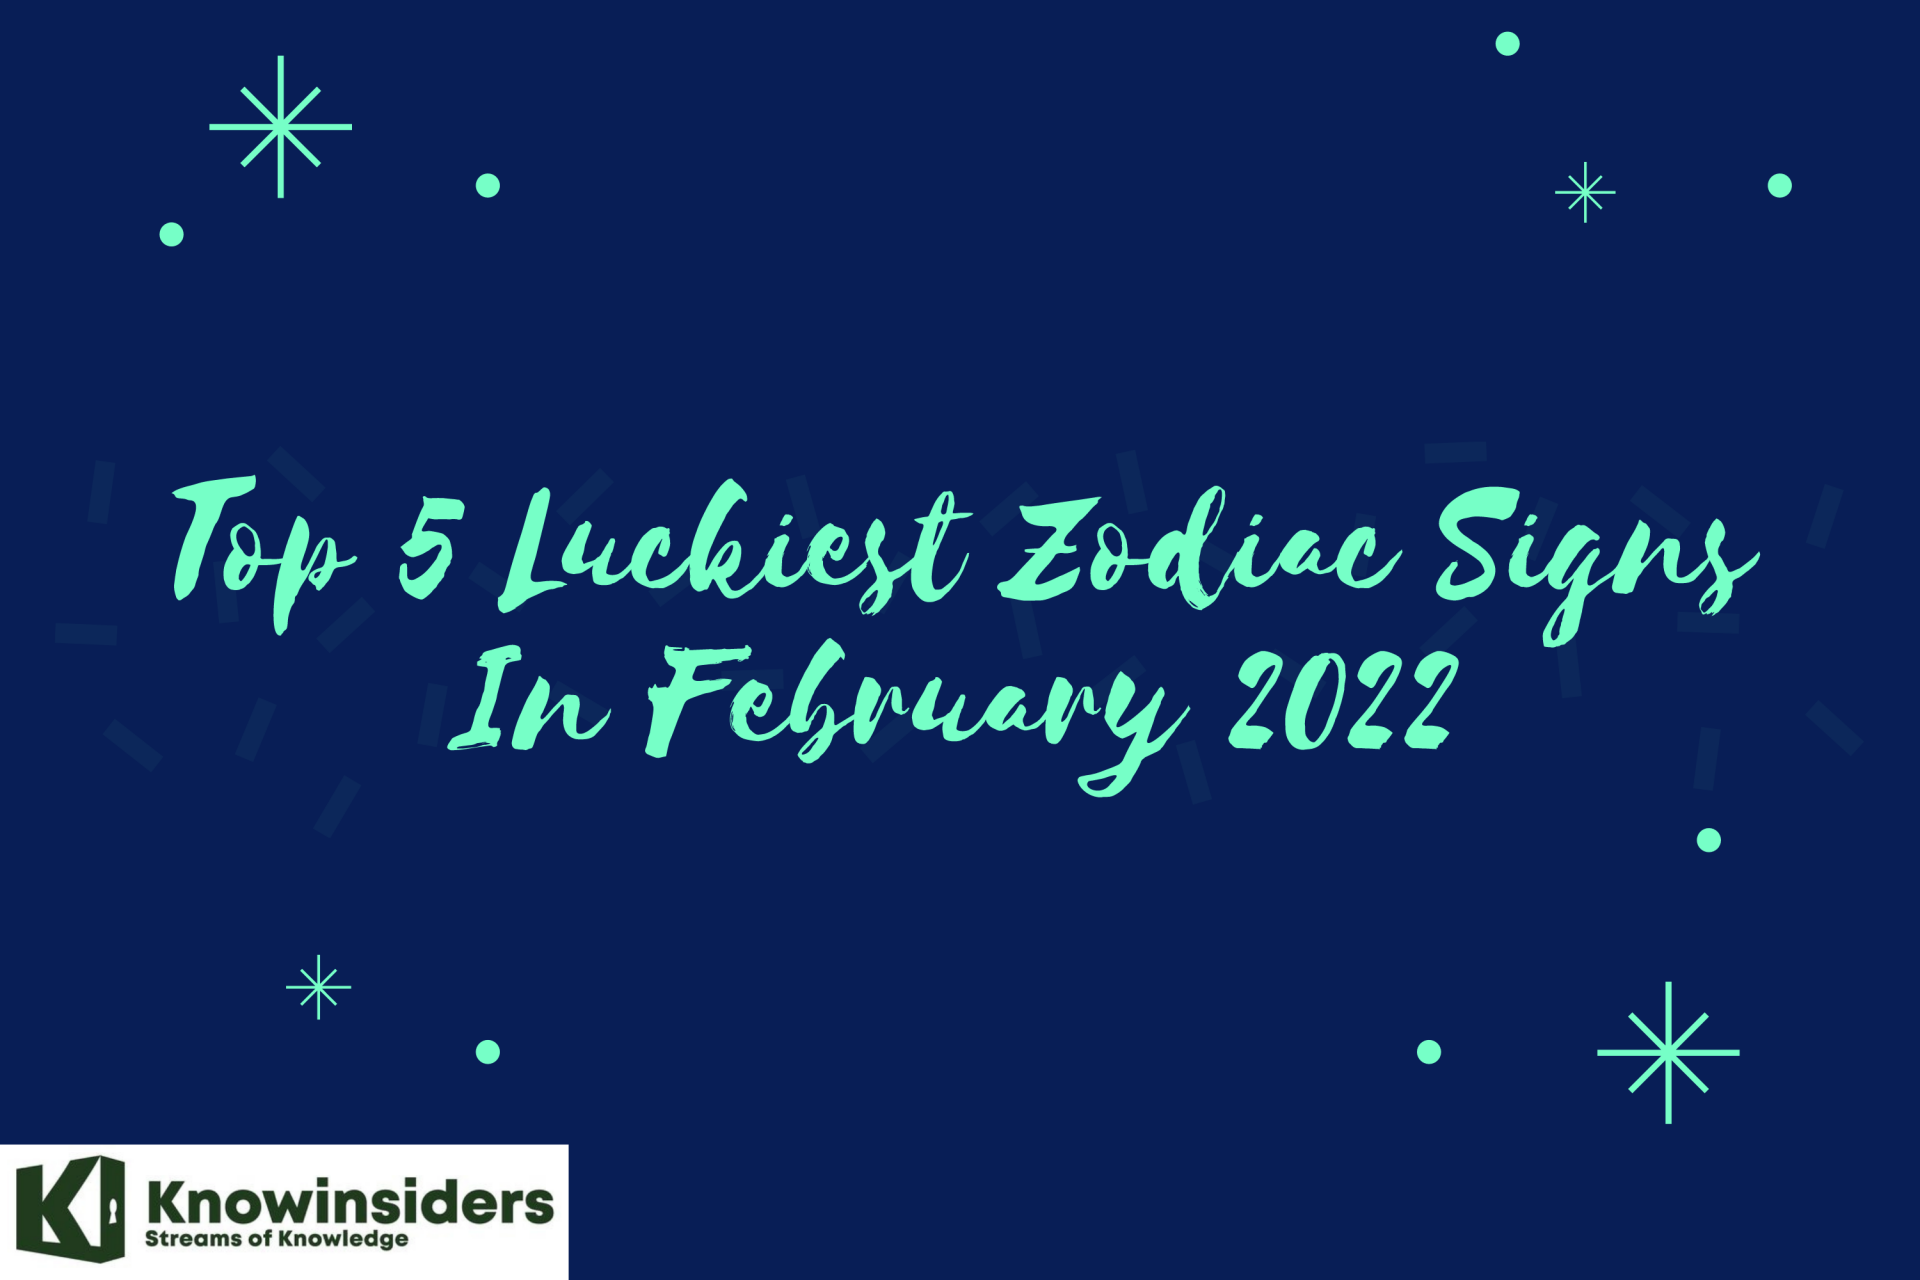 Top 5 Luckiest Zodiac Signs In February 2022